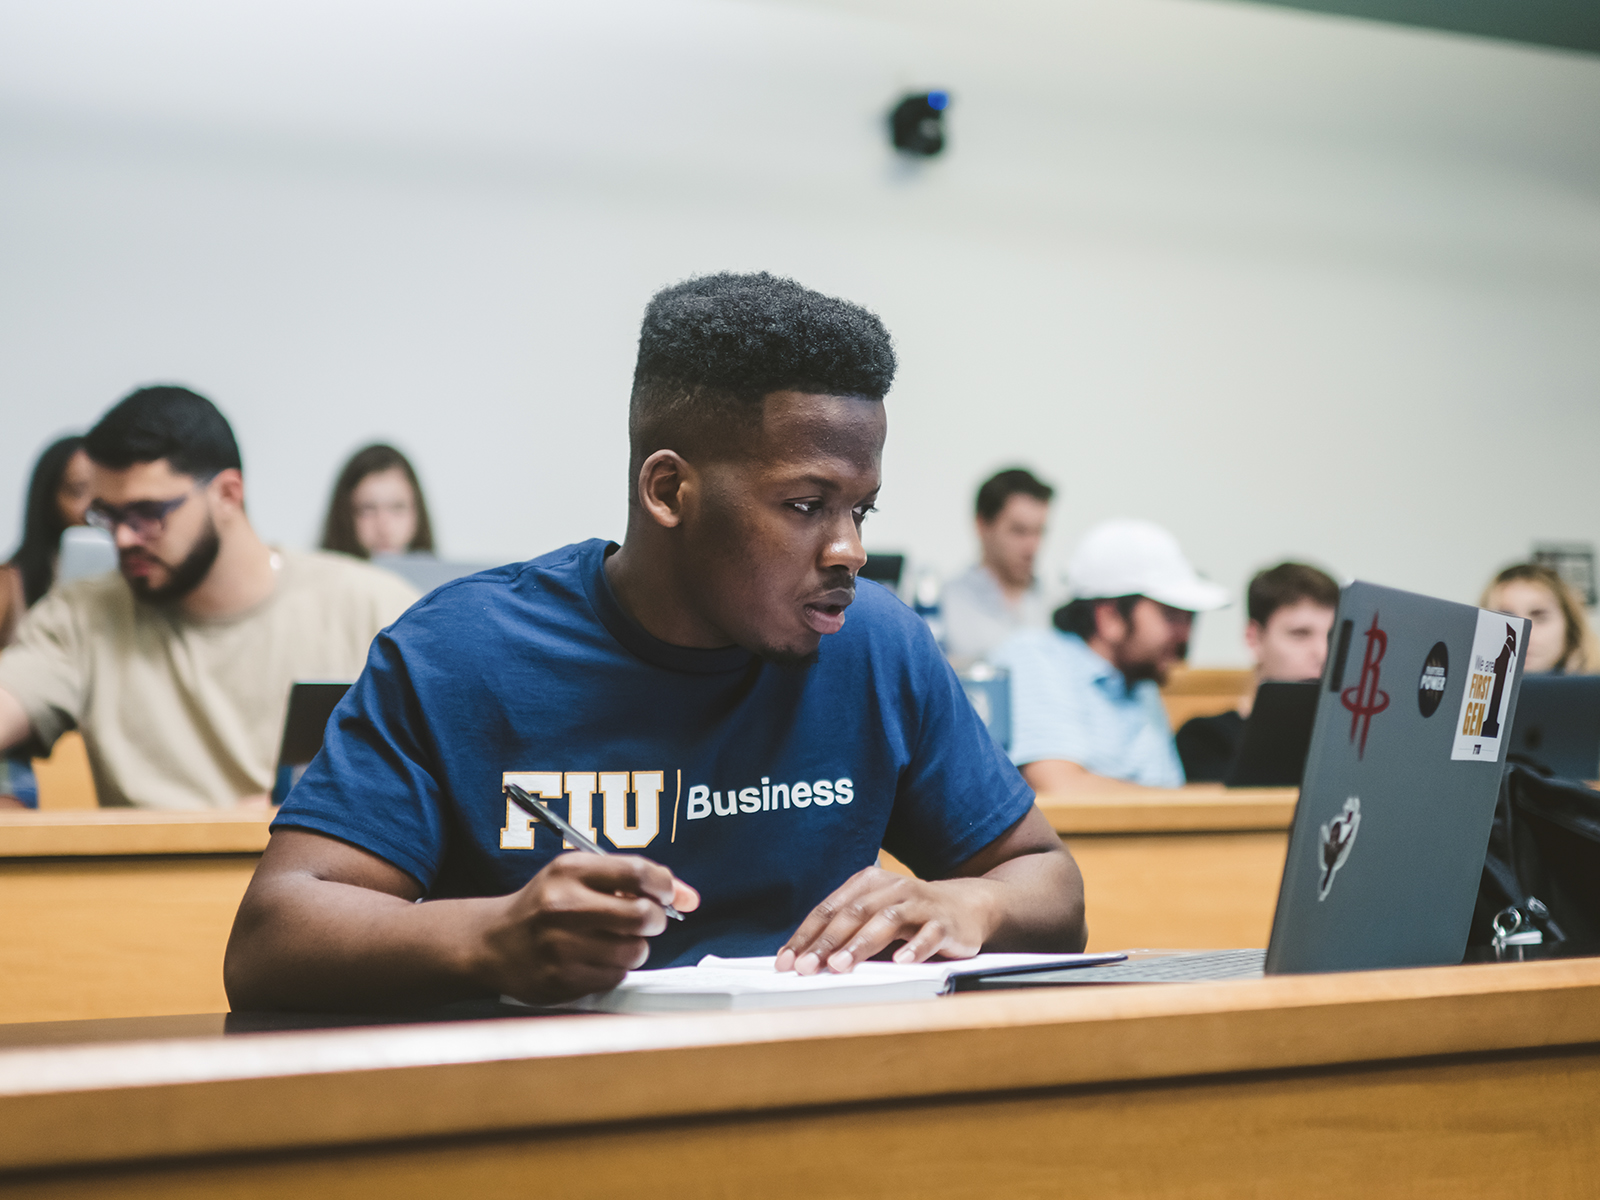 FIU Business students in the classroom